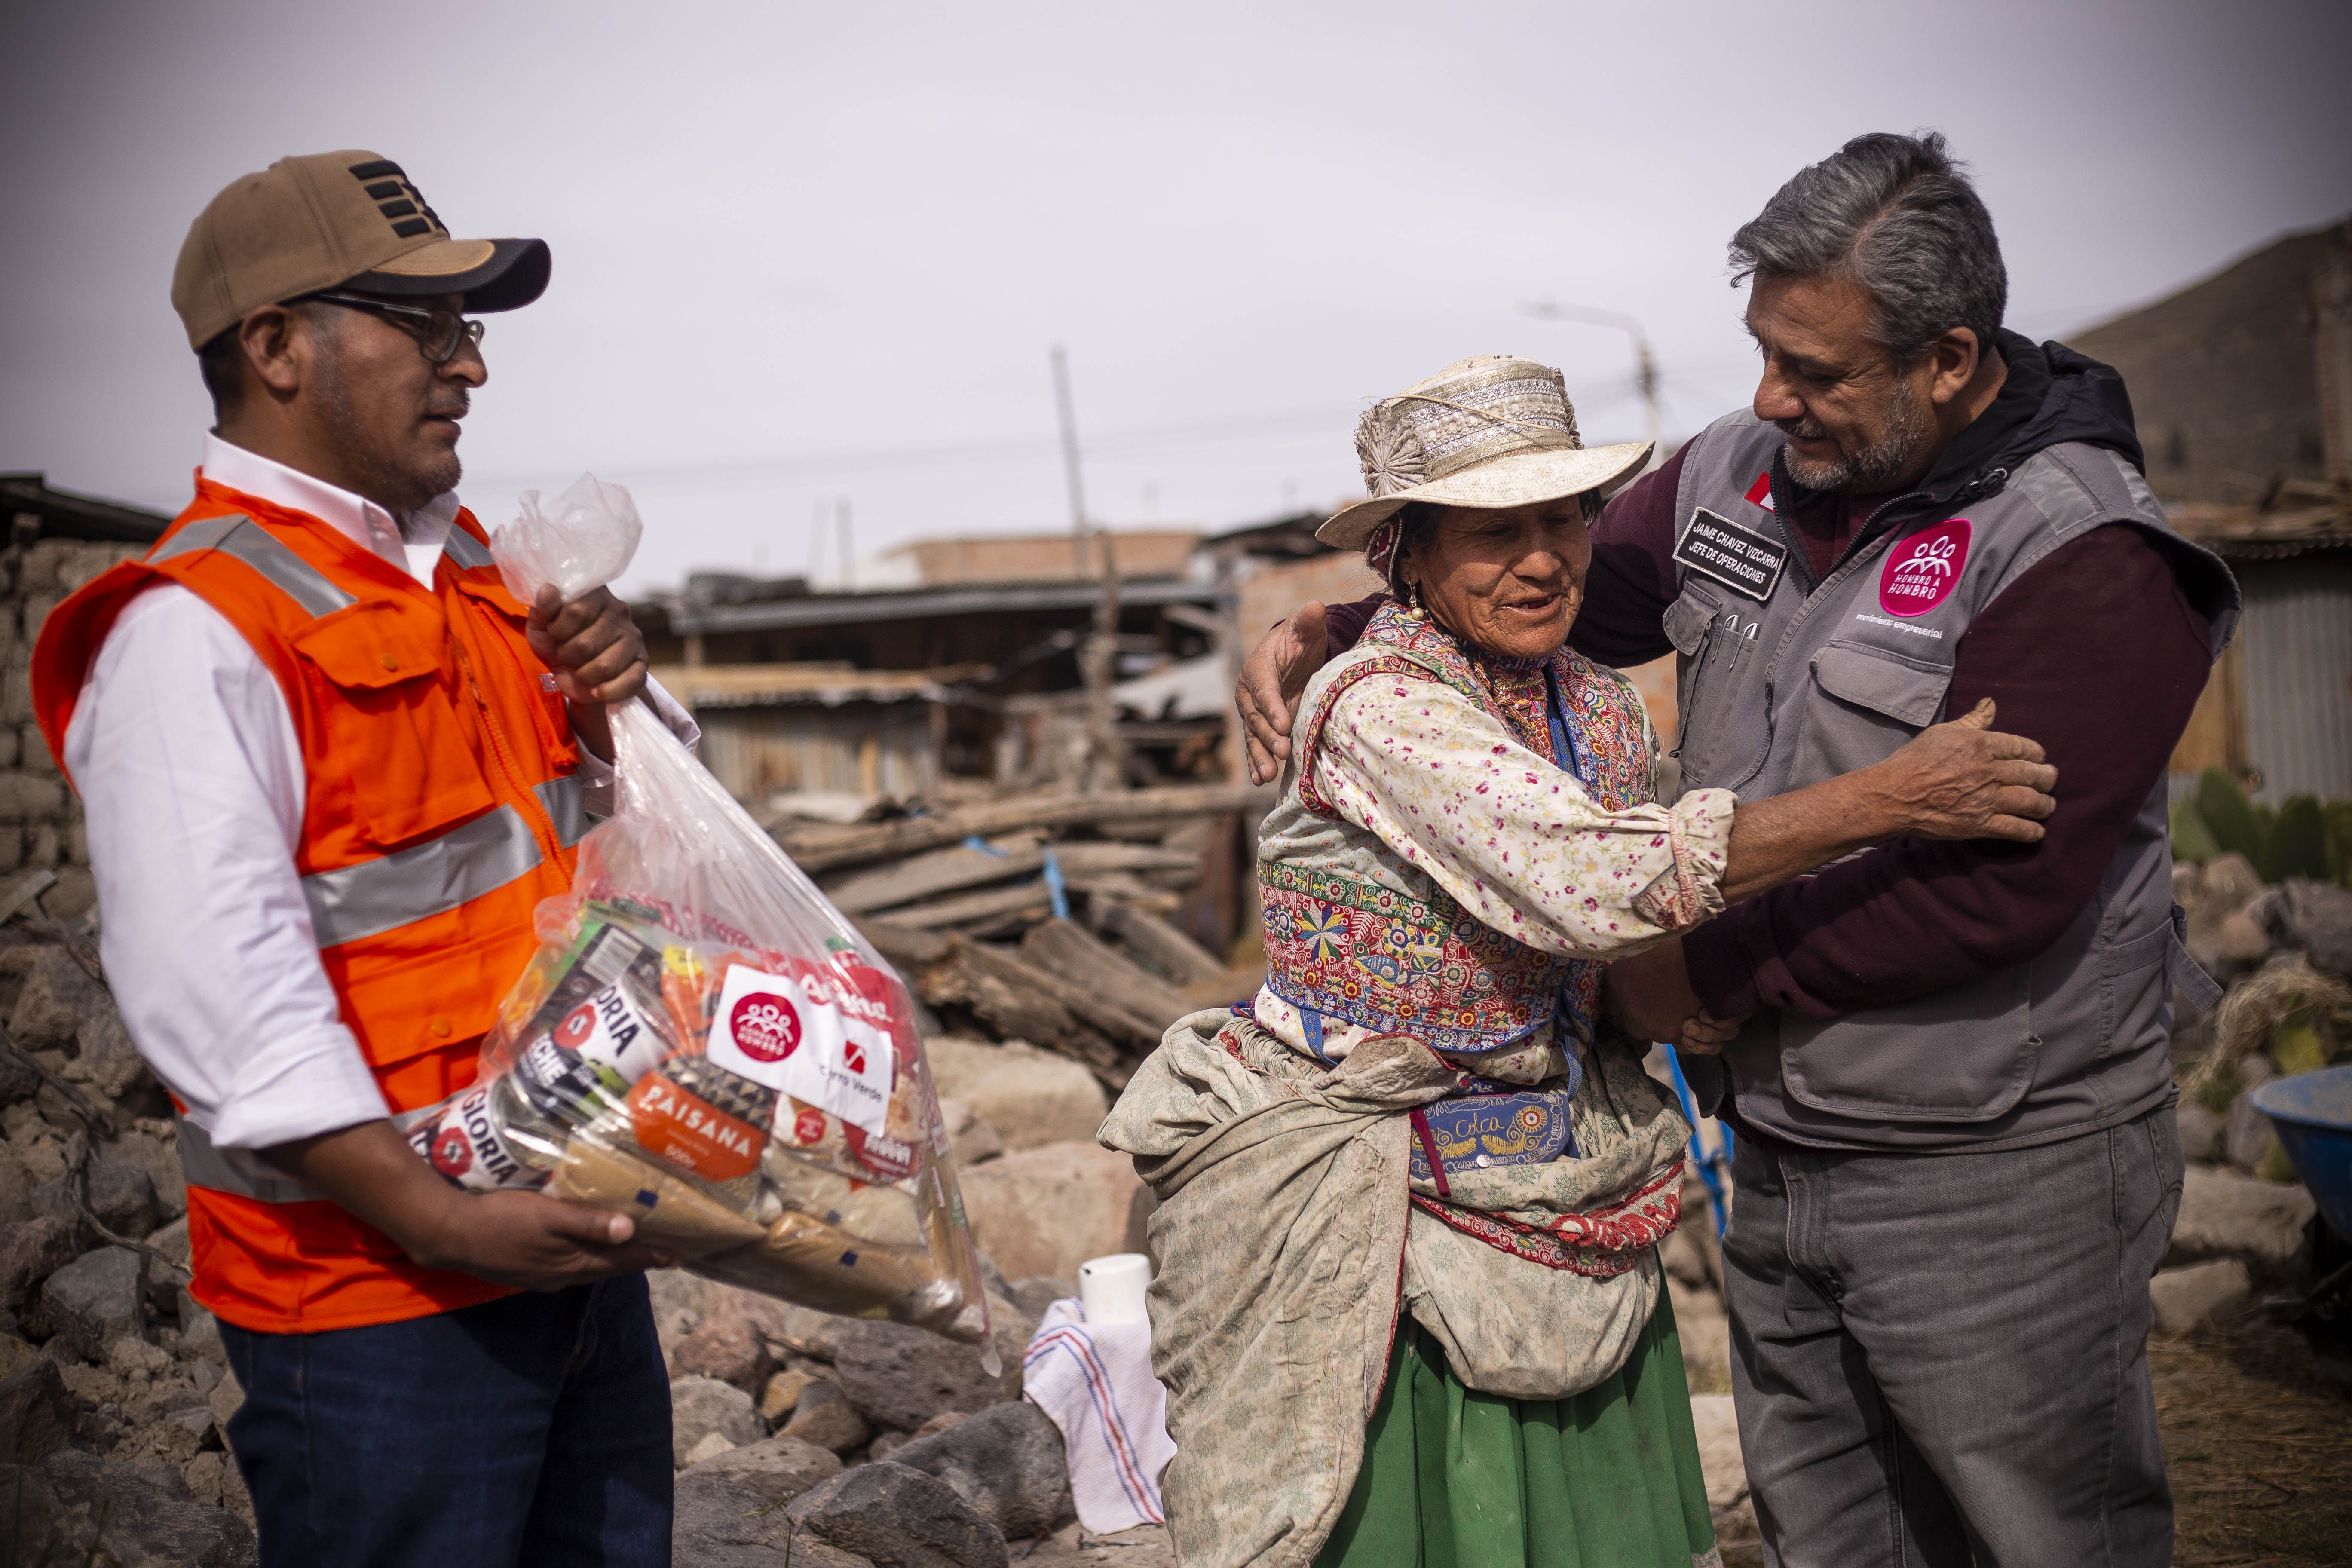 Jaime, through his work with CBi Member Network Hombro a Hombro, distributes aid to vulnerable populations affected by recent earthquakes in Peru.